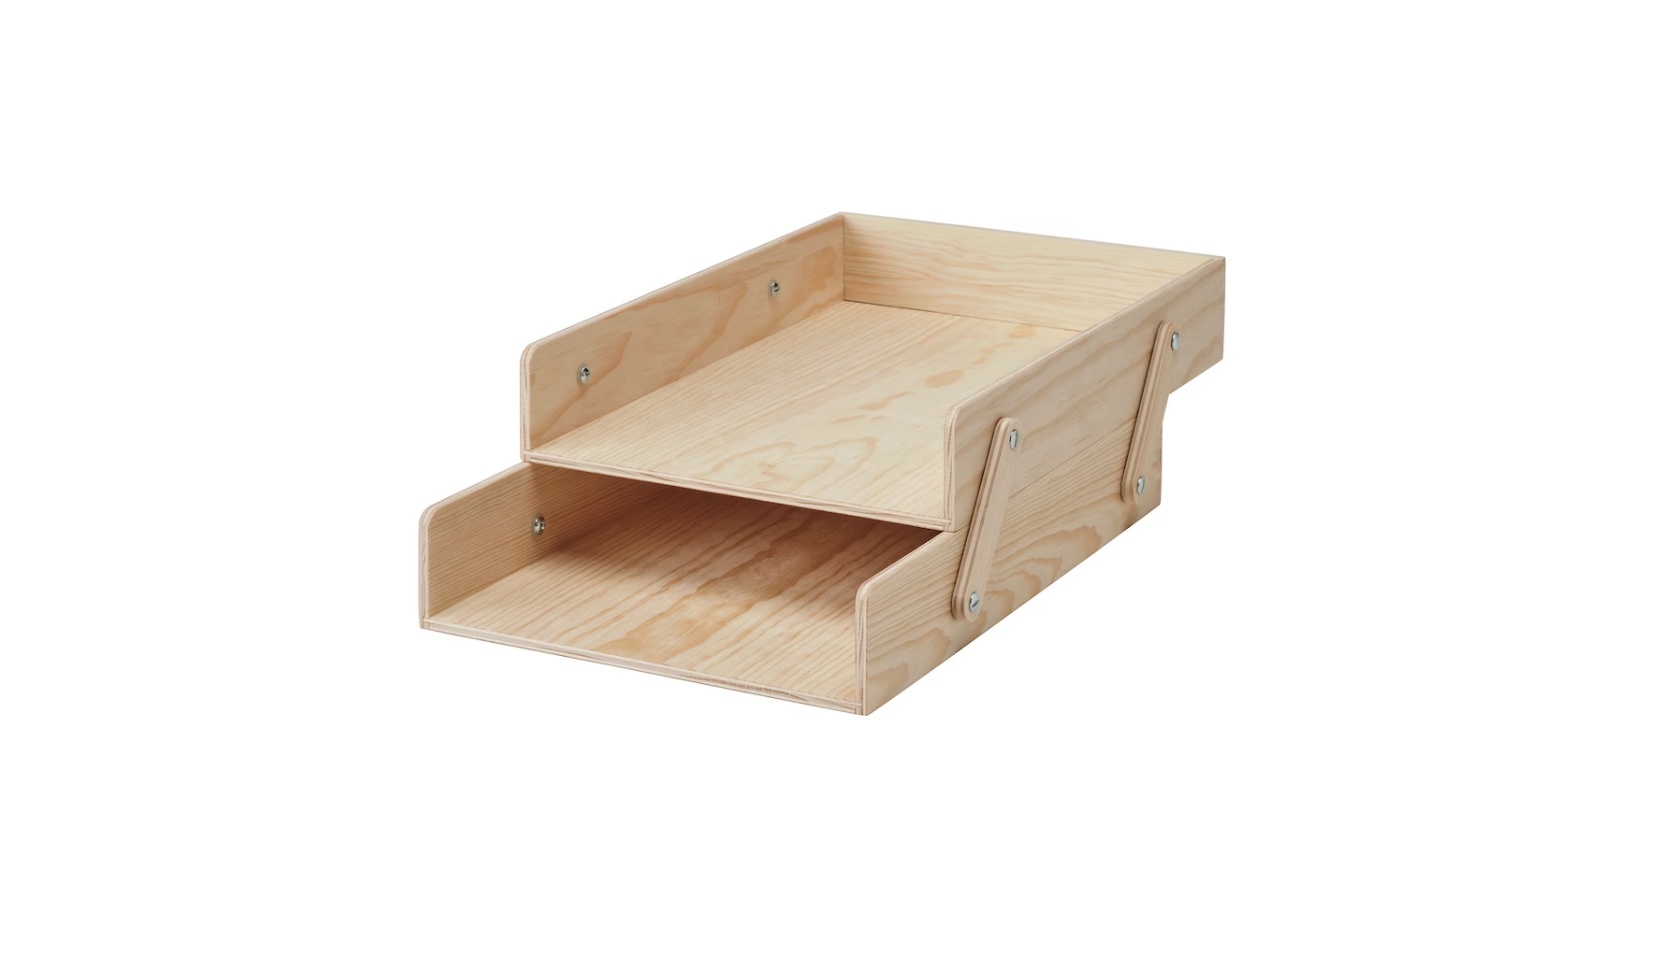 The Klammemacka Letter Tray is made of plywood; $14.99.